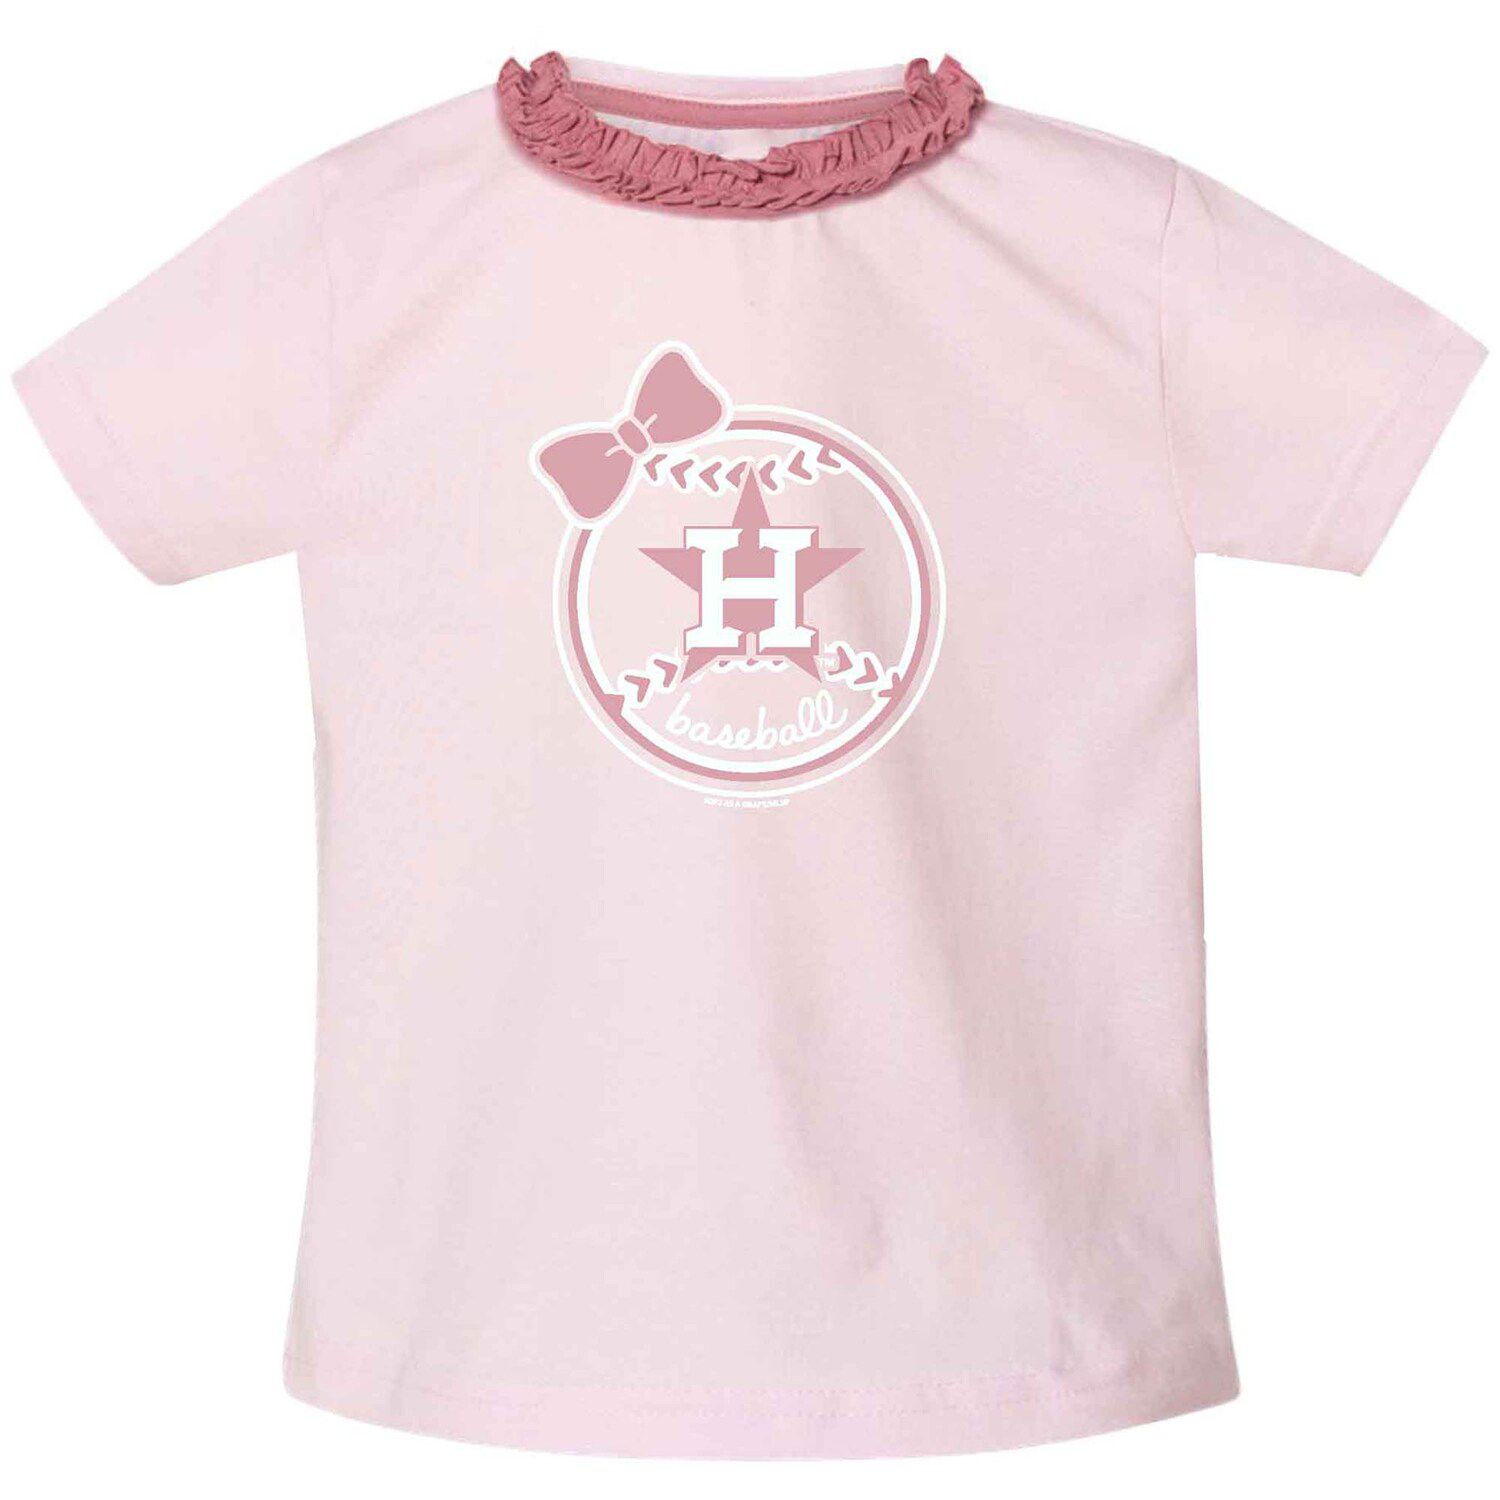 Image for Unbranded Girls Toddler Soft as a Grape Pink Houston Astros Ruffle Collar T-Shirt at Kohl's.